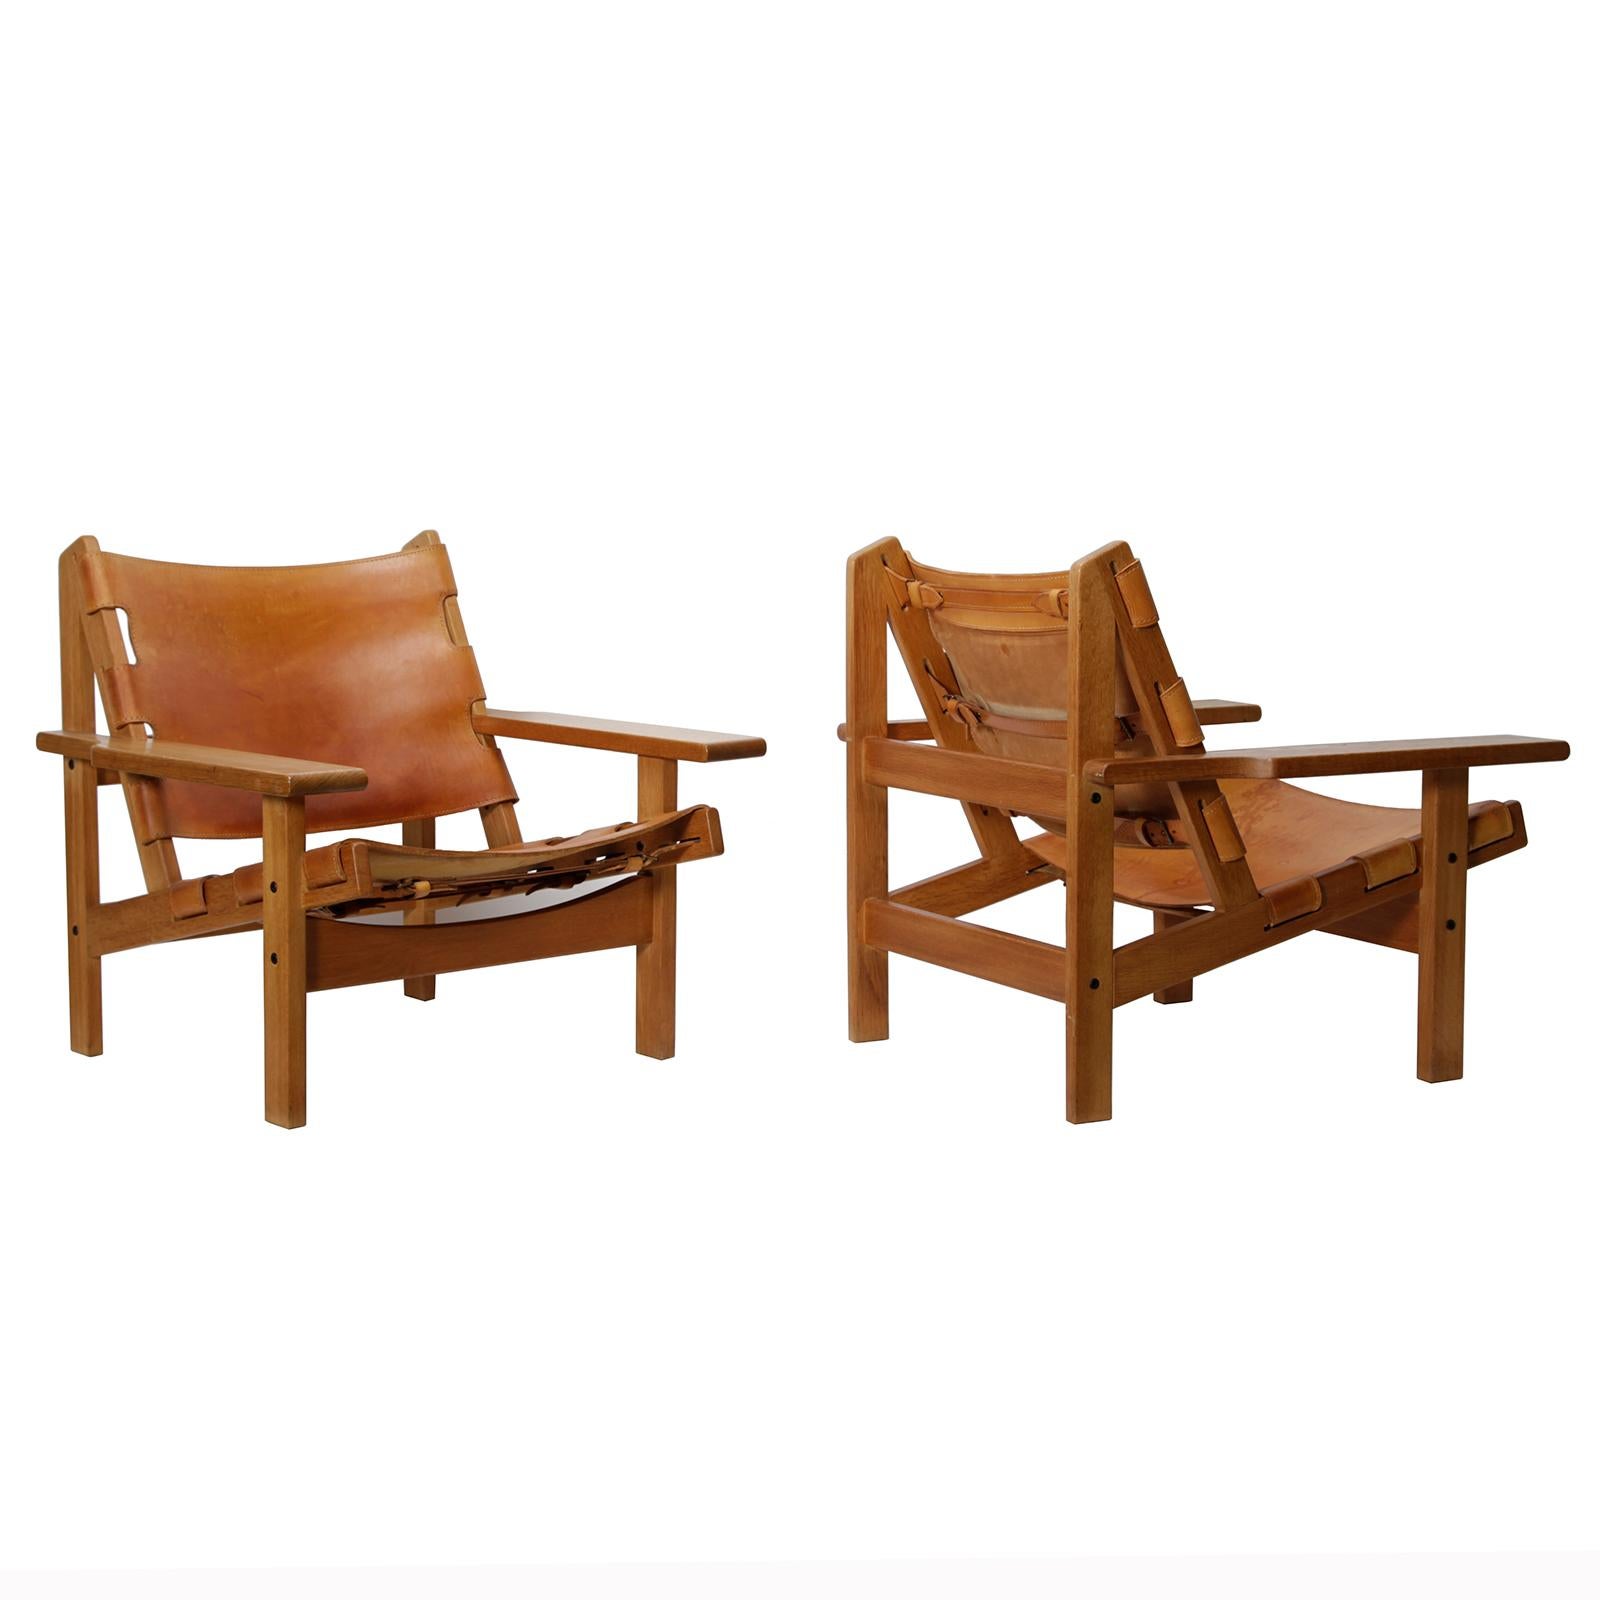 Scandinavian Modern Pair of Danish Hunting Chairs in Oak and Saddle Leather by Kurt Østervig